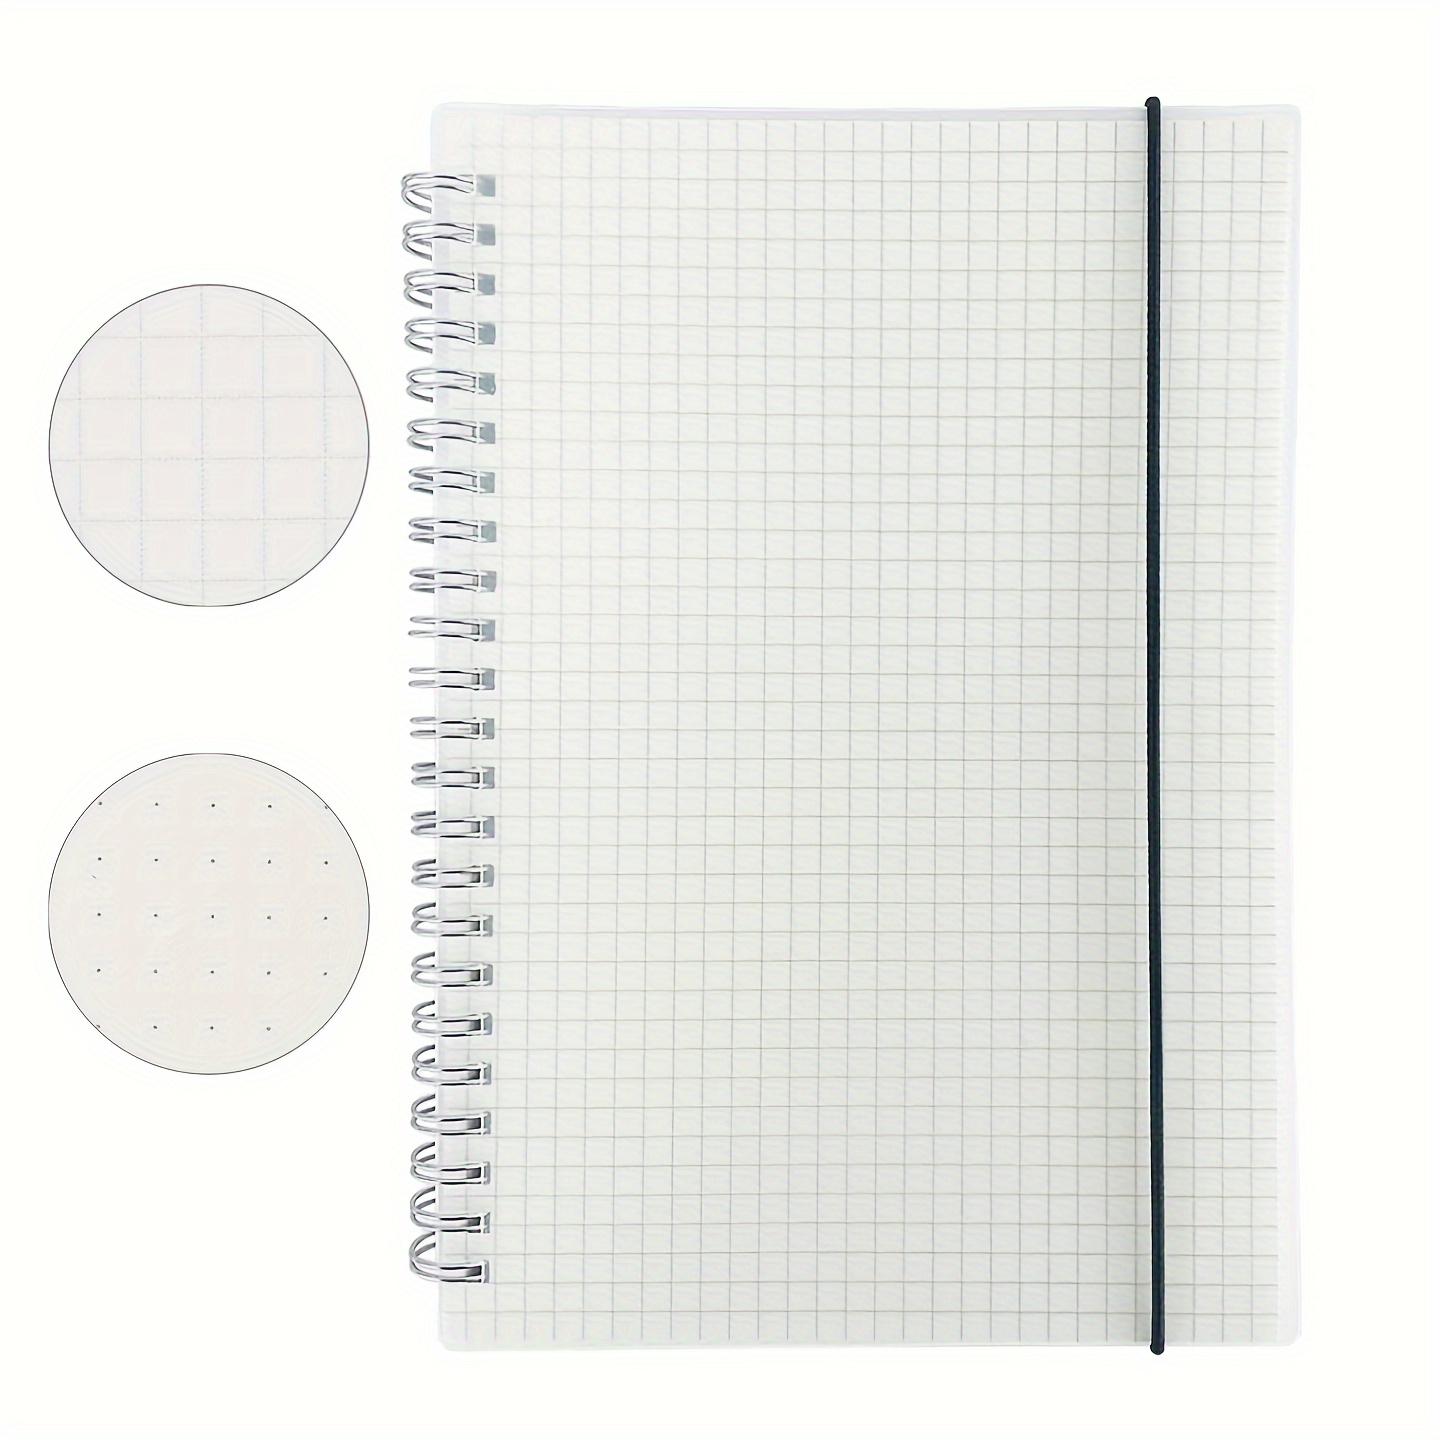  Yiozojio Dotted Spiral Notebooks - 3 Pack A5 Bullet Journals  100 Sheets/200 Pages 5 x 5mm Dot Grid Paper - Journals for Study and Notes  5.7 x 8.3 inches (Blue,Pink,black) : Office Products